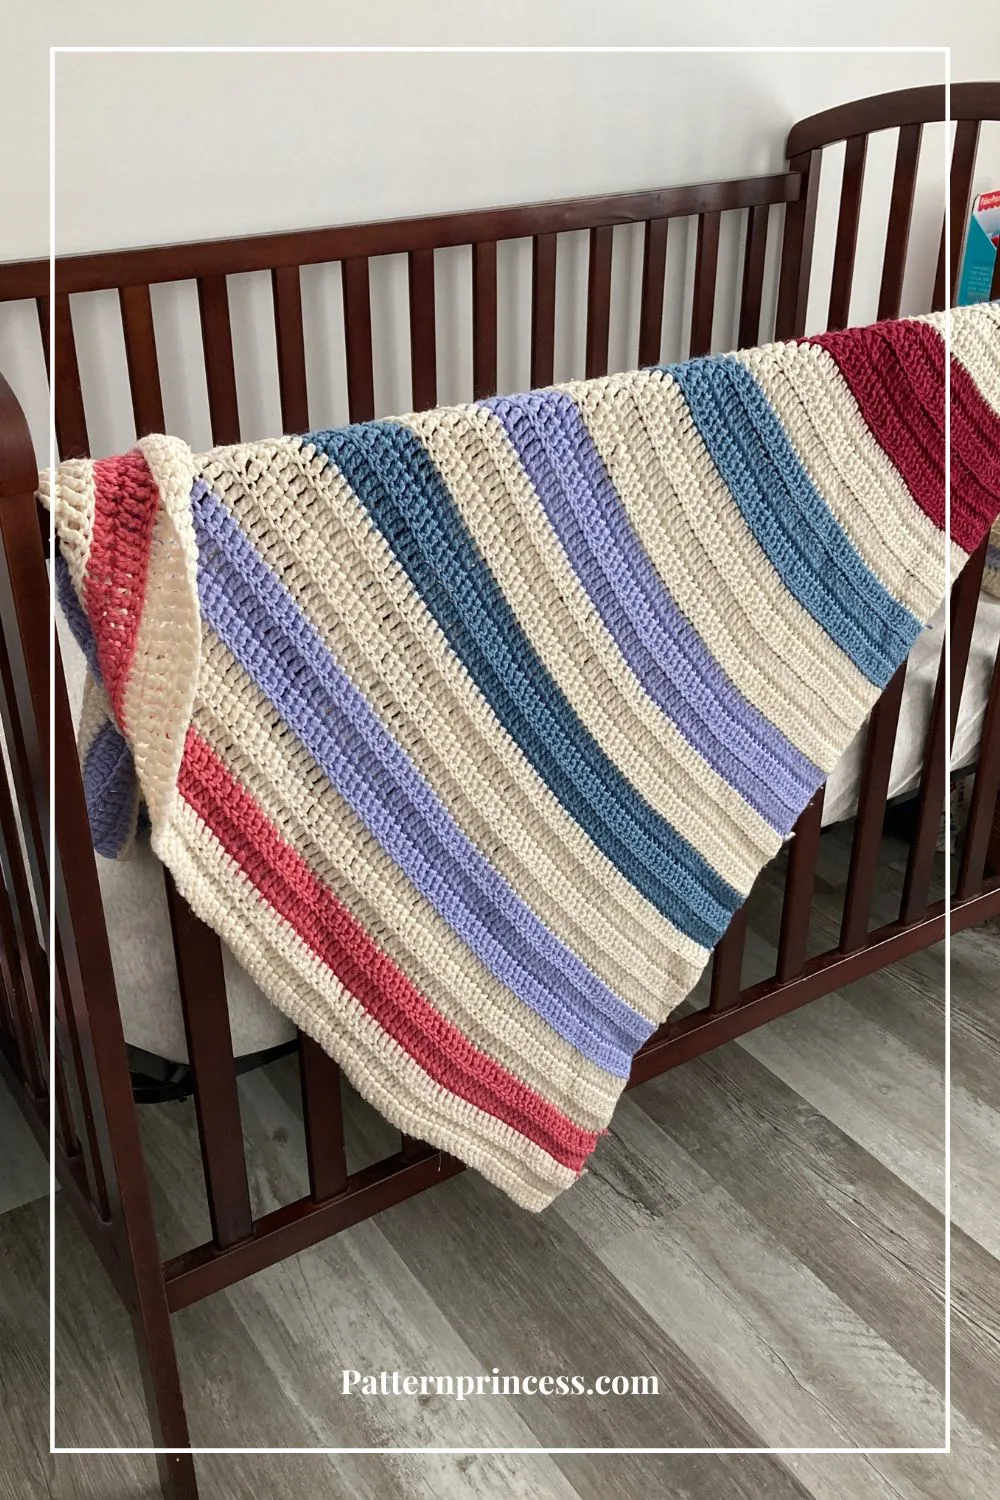 Scrappy Baby Blanket on the side of a crib